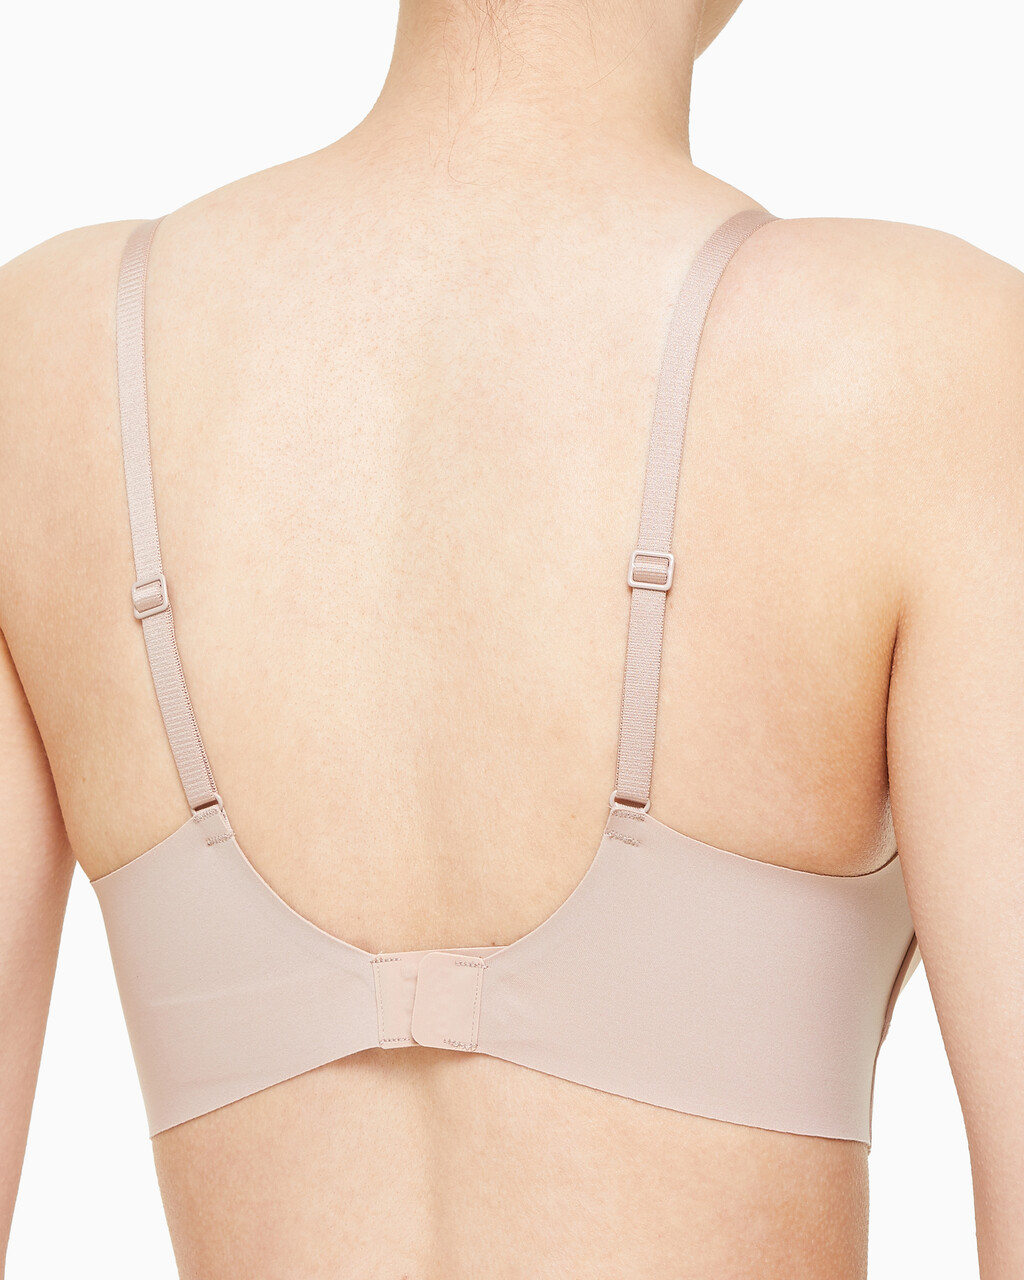 INVISIBLES LIGHTLY LINED TRIANGLE BRA, Cedar, hi-res